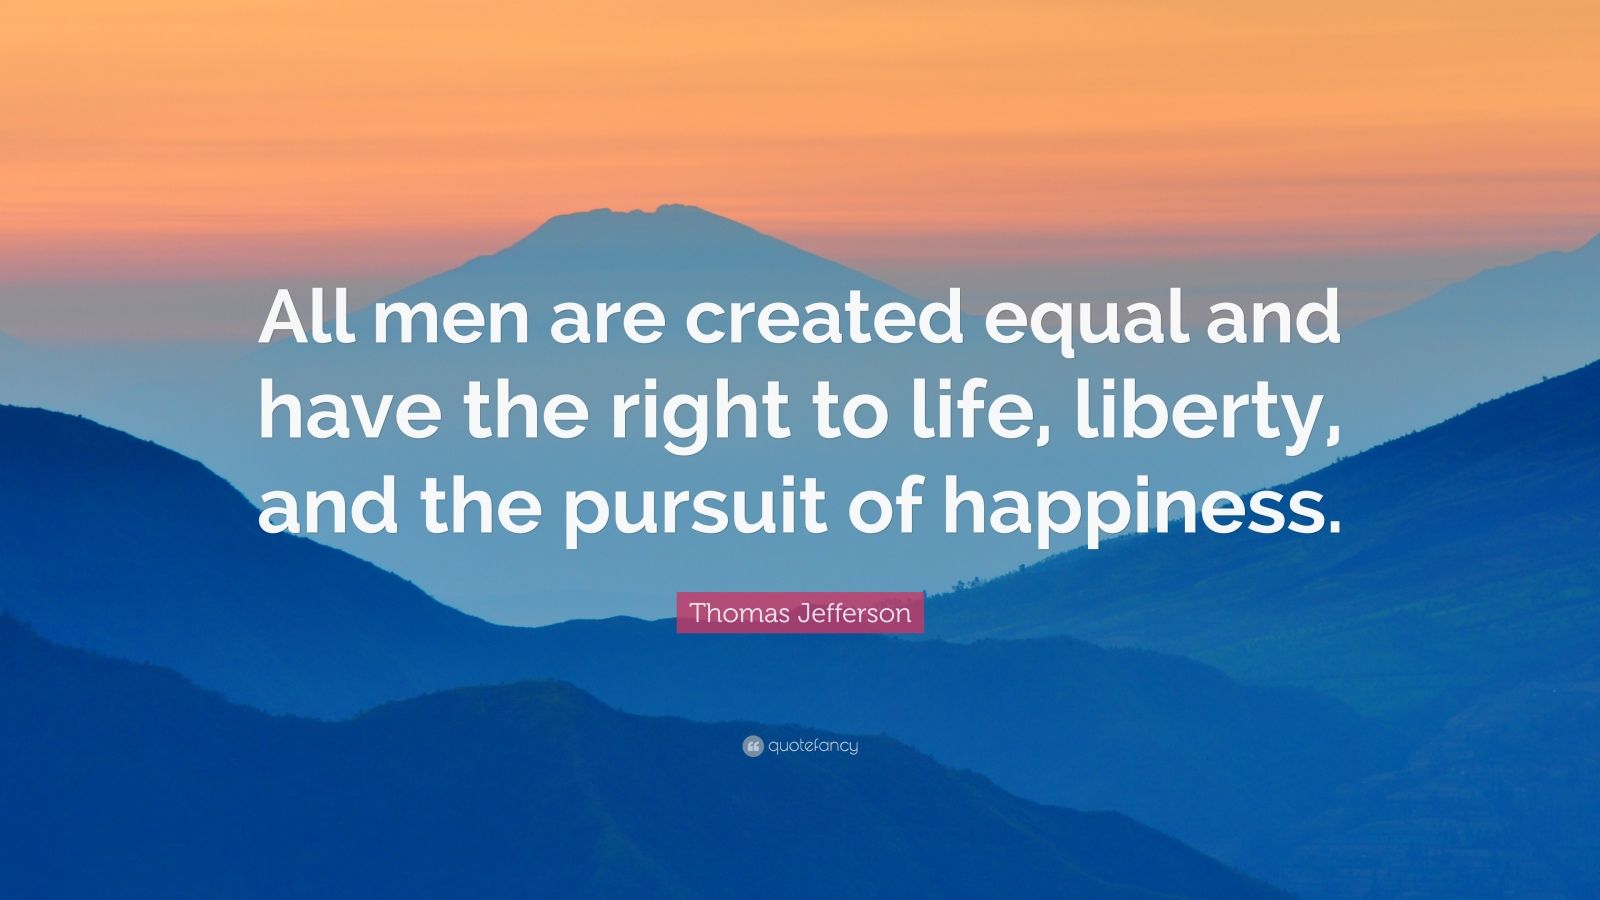 Thomas Jefferson Quote: “All men are created equal and have the right